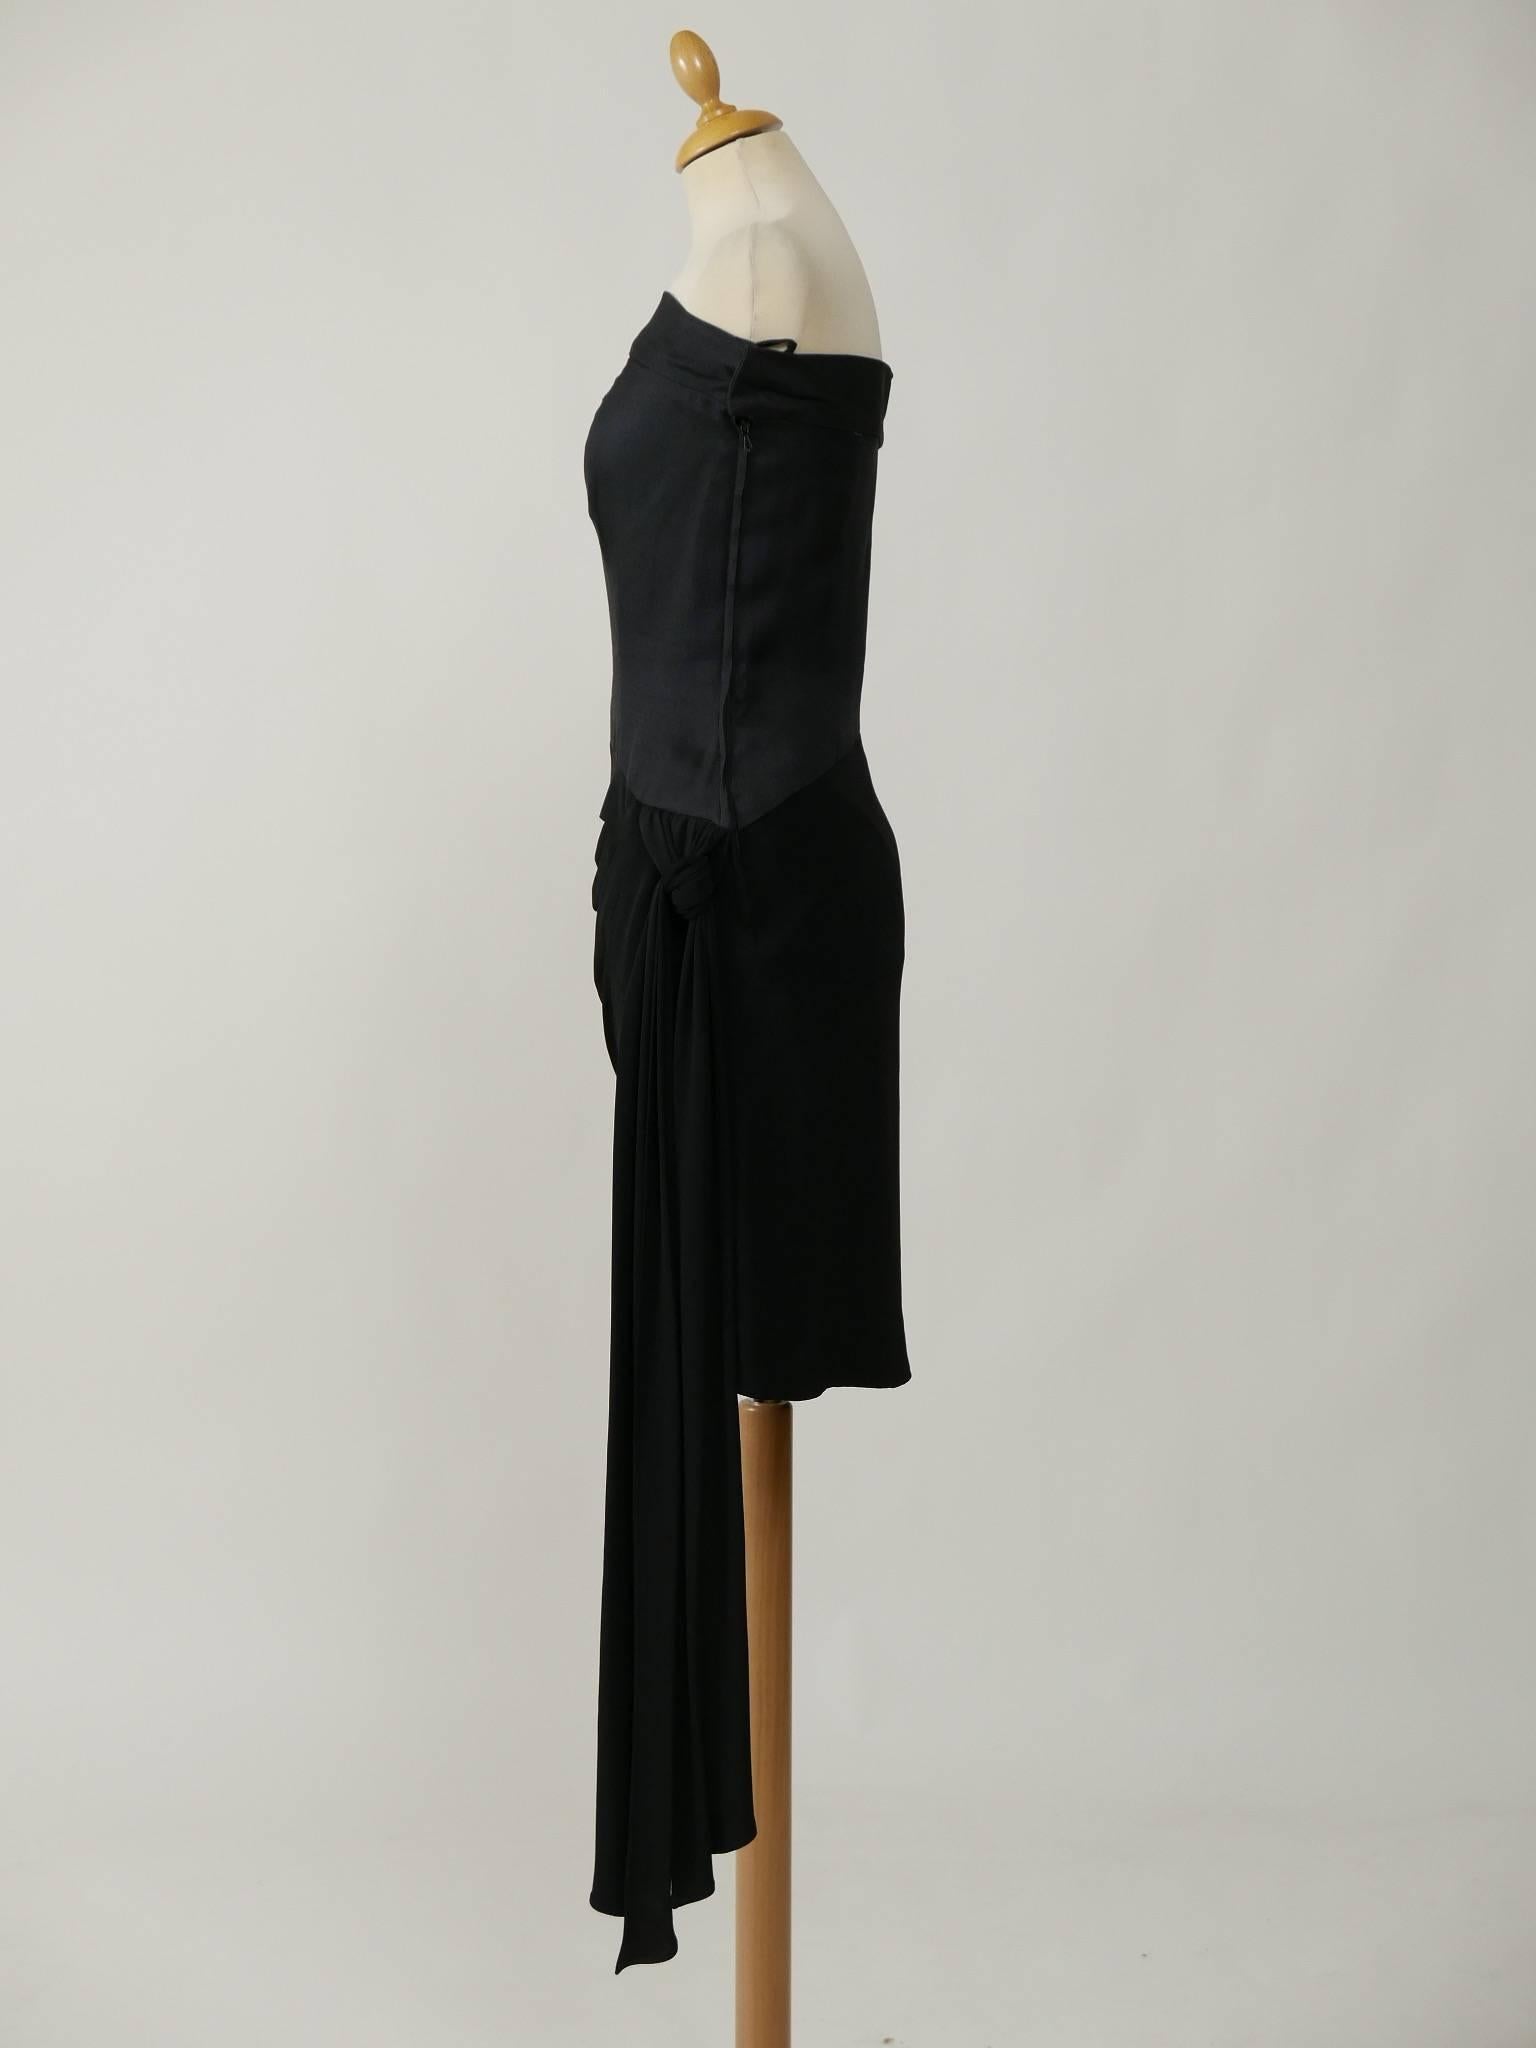 This amazing Saint Laurent 1980s strapless cocktail dress is in a black linen and silk crepe fabric. It has boning bodice, side zip closure and is satin lined. 

Very Good vintage condition

Label: Saint Laurent Rive Gauche
Fabric: